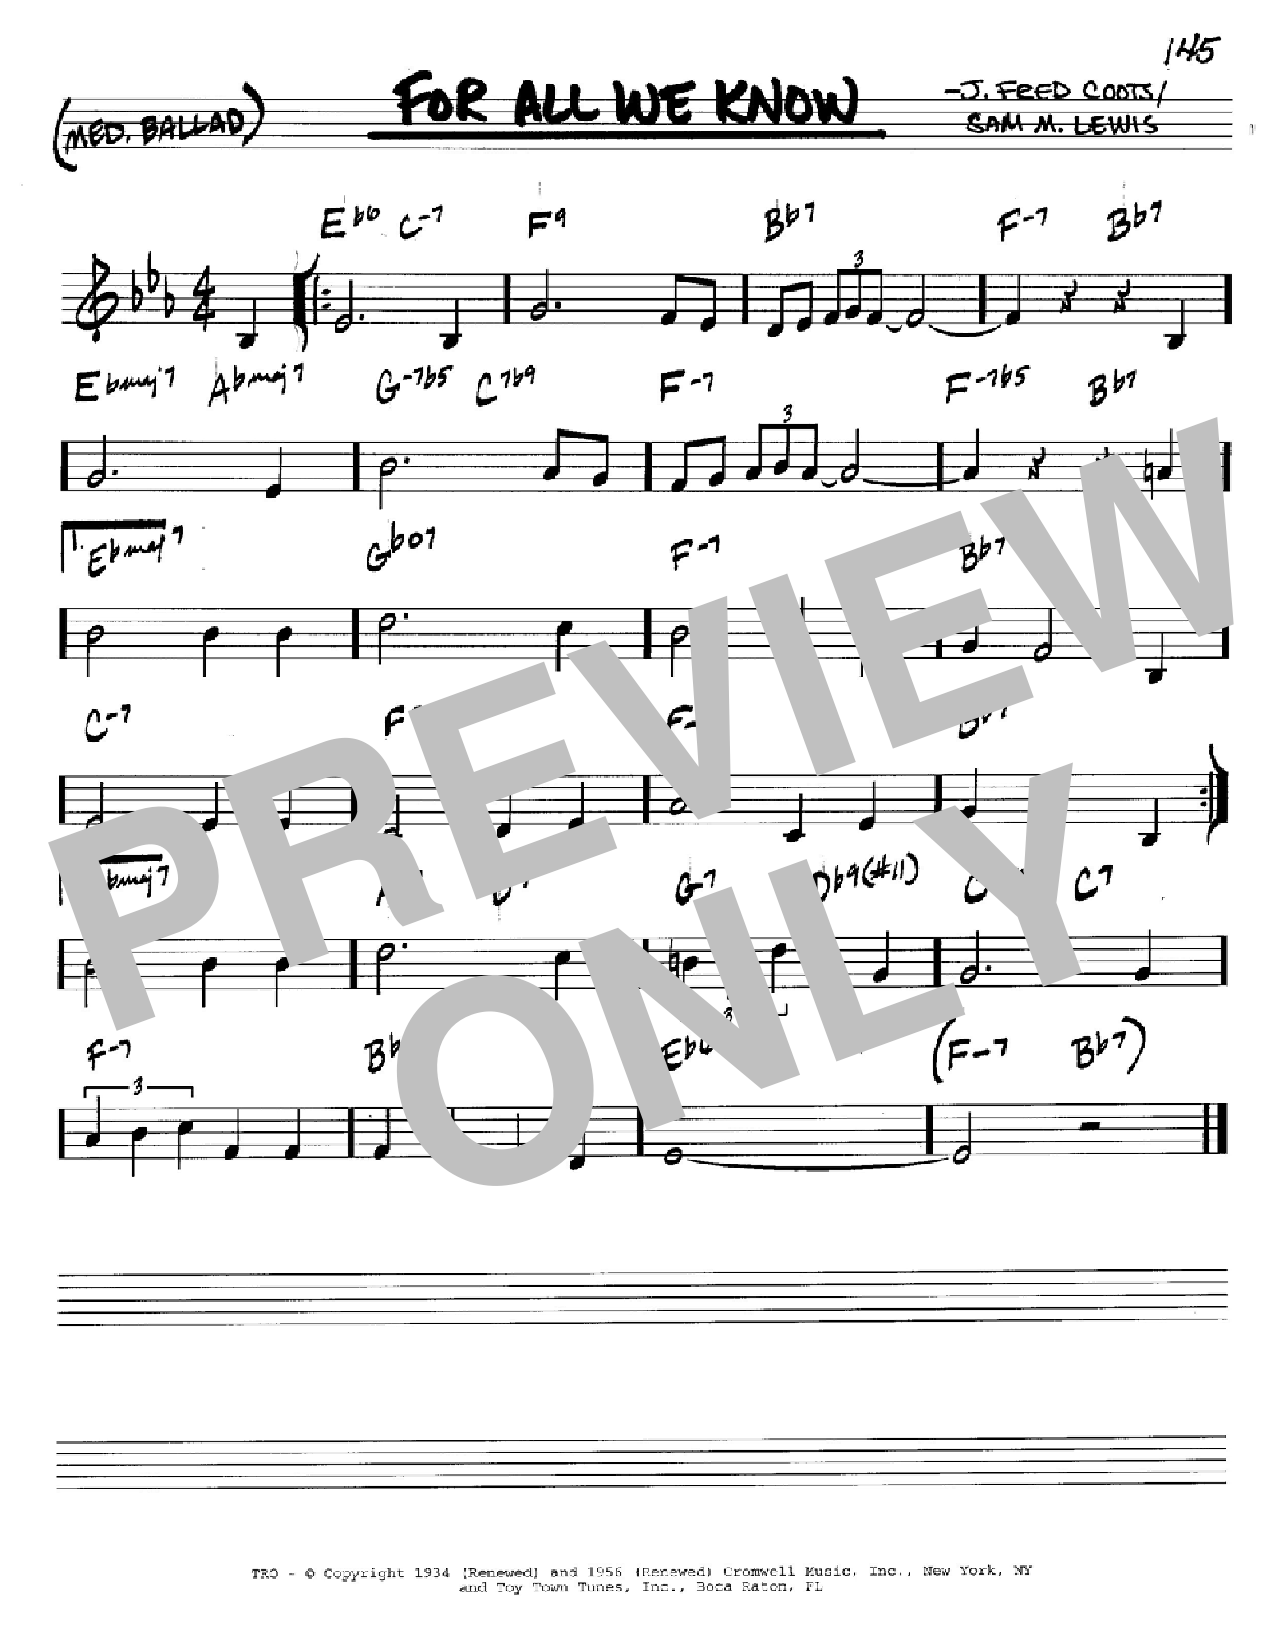 Download Sam M. Lewis For All We Know Sheet Music